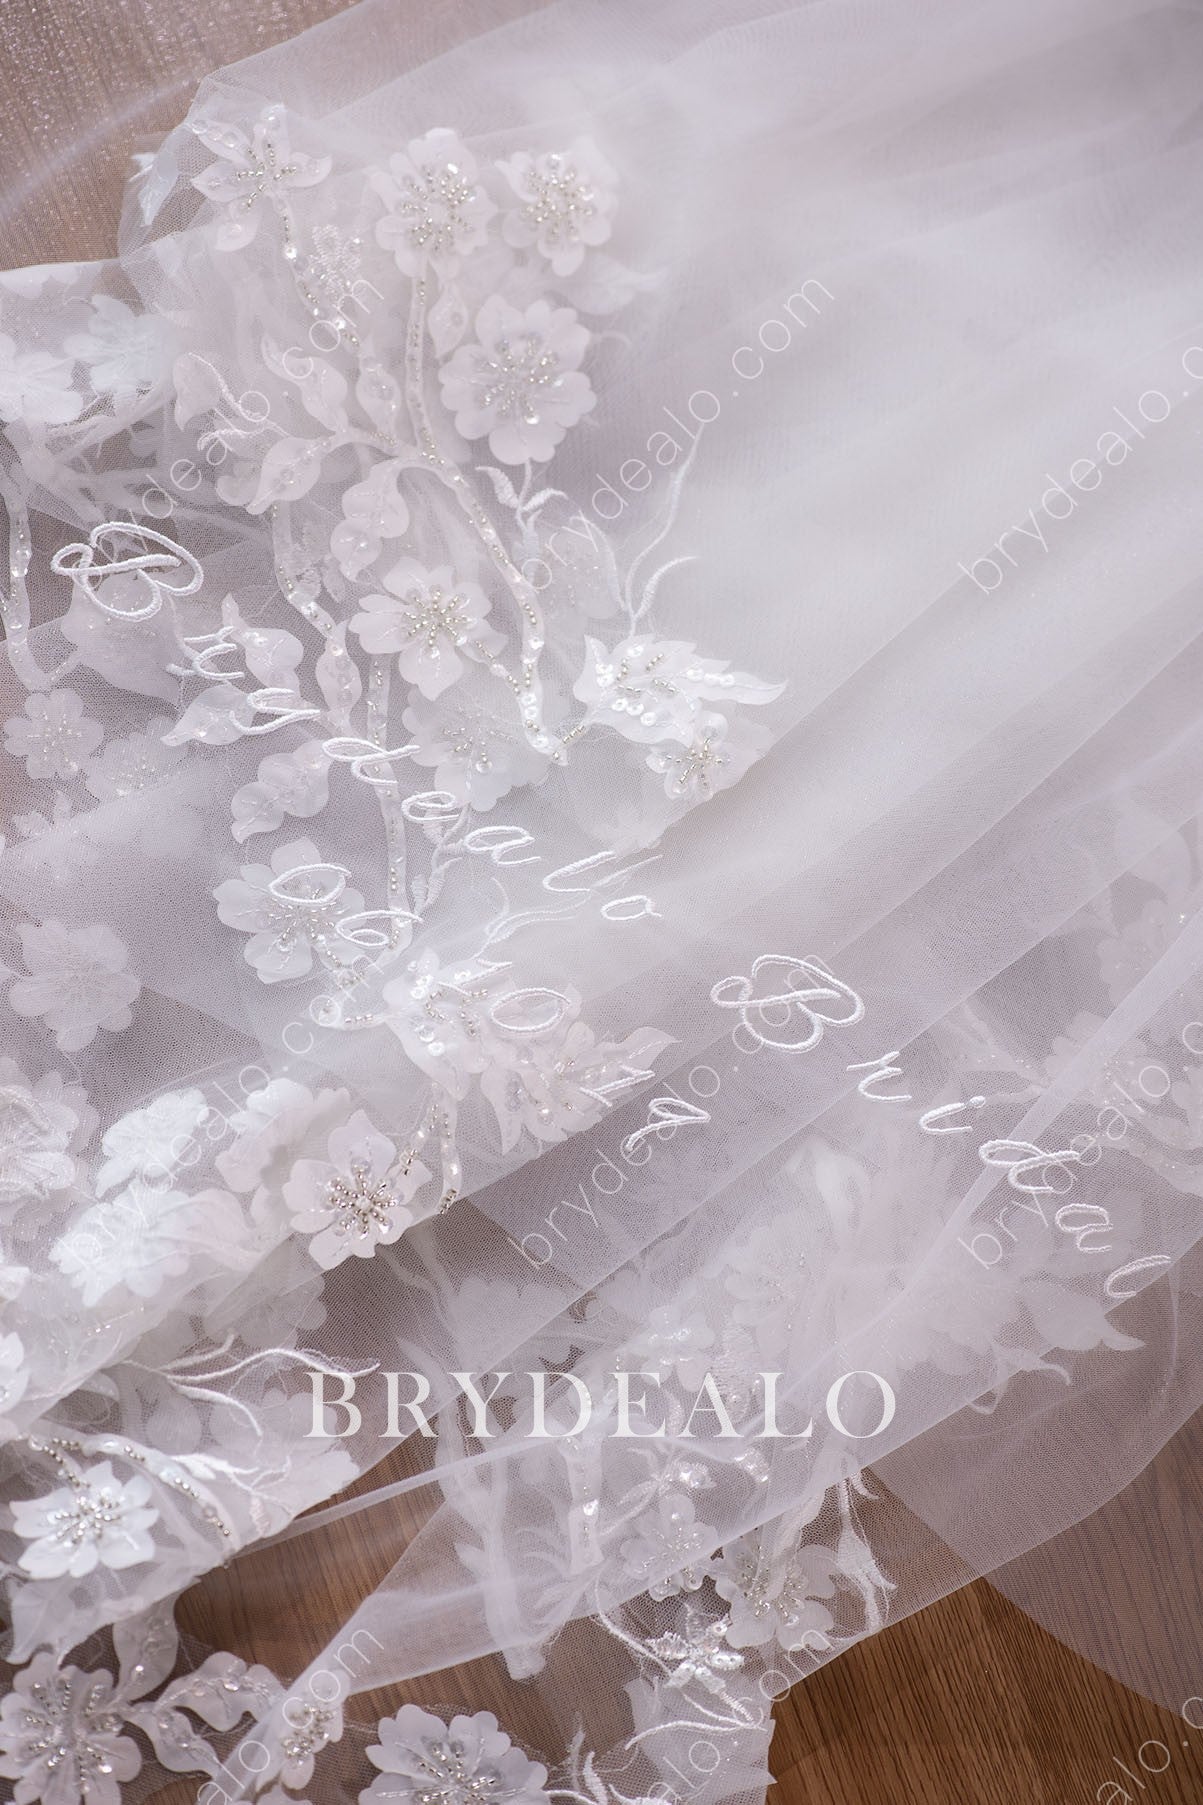 embroidered lace bridal veil